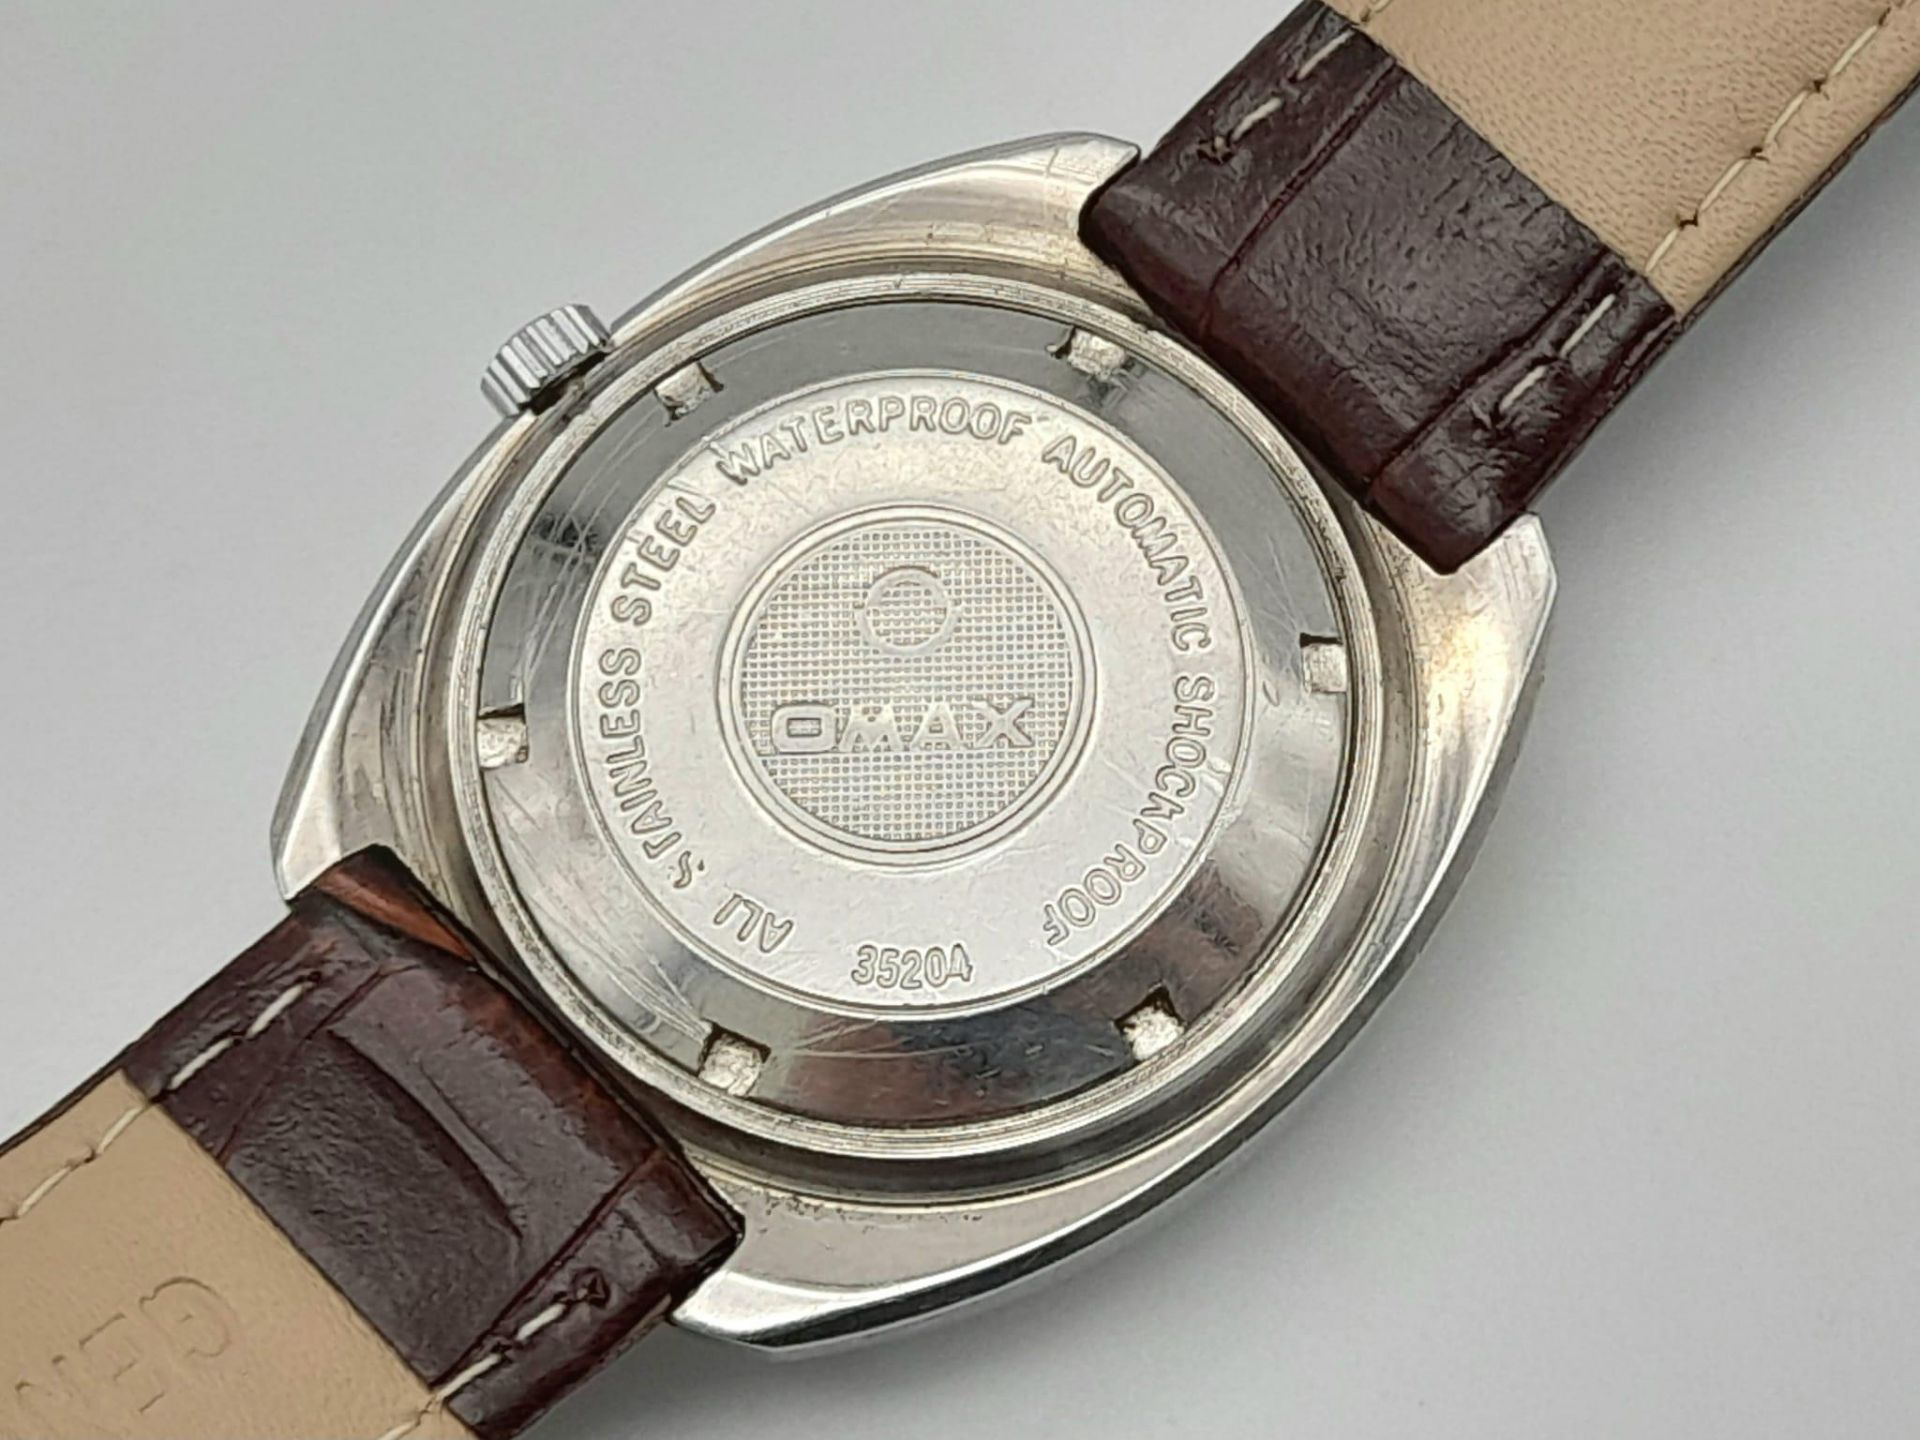 A Vintage Omax Crystal 25 Jewel Gents Watch. Brown leather strap. Stainless steel case - 36mm. - Bild 4 aus 4